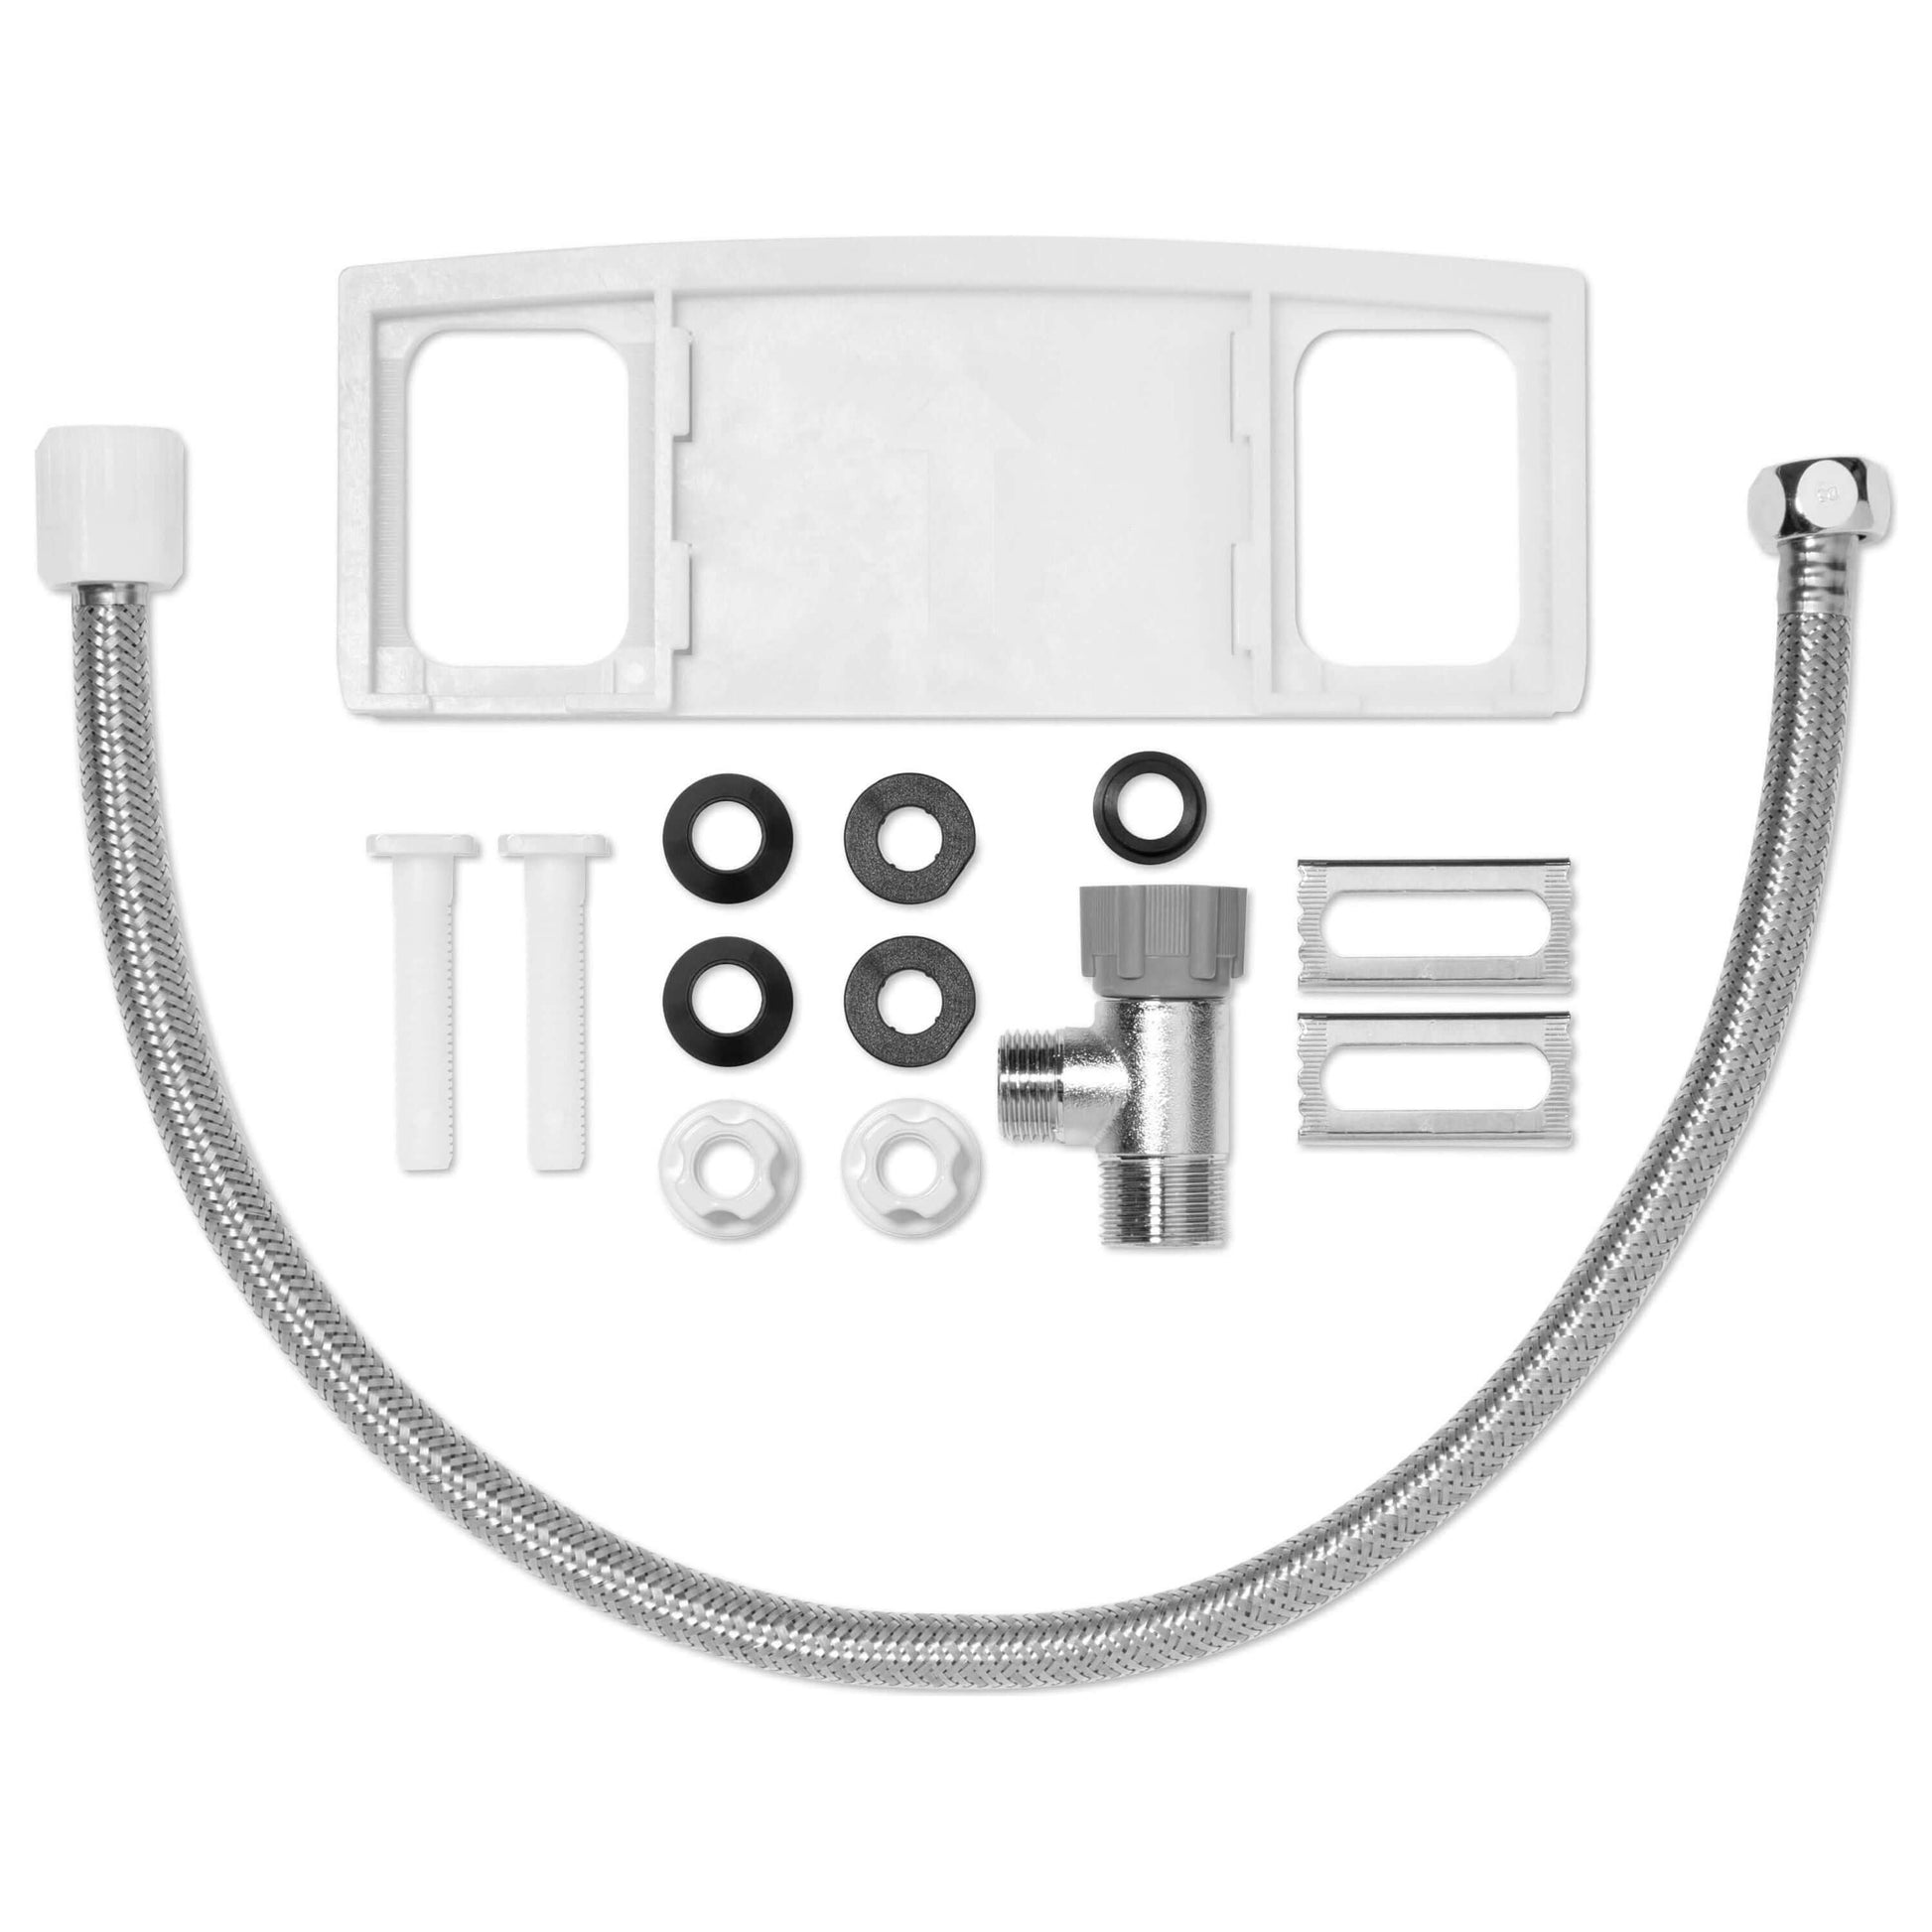 Swash Select BL97 Bidet Seat - top view of included parts